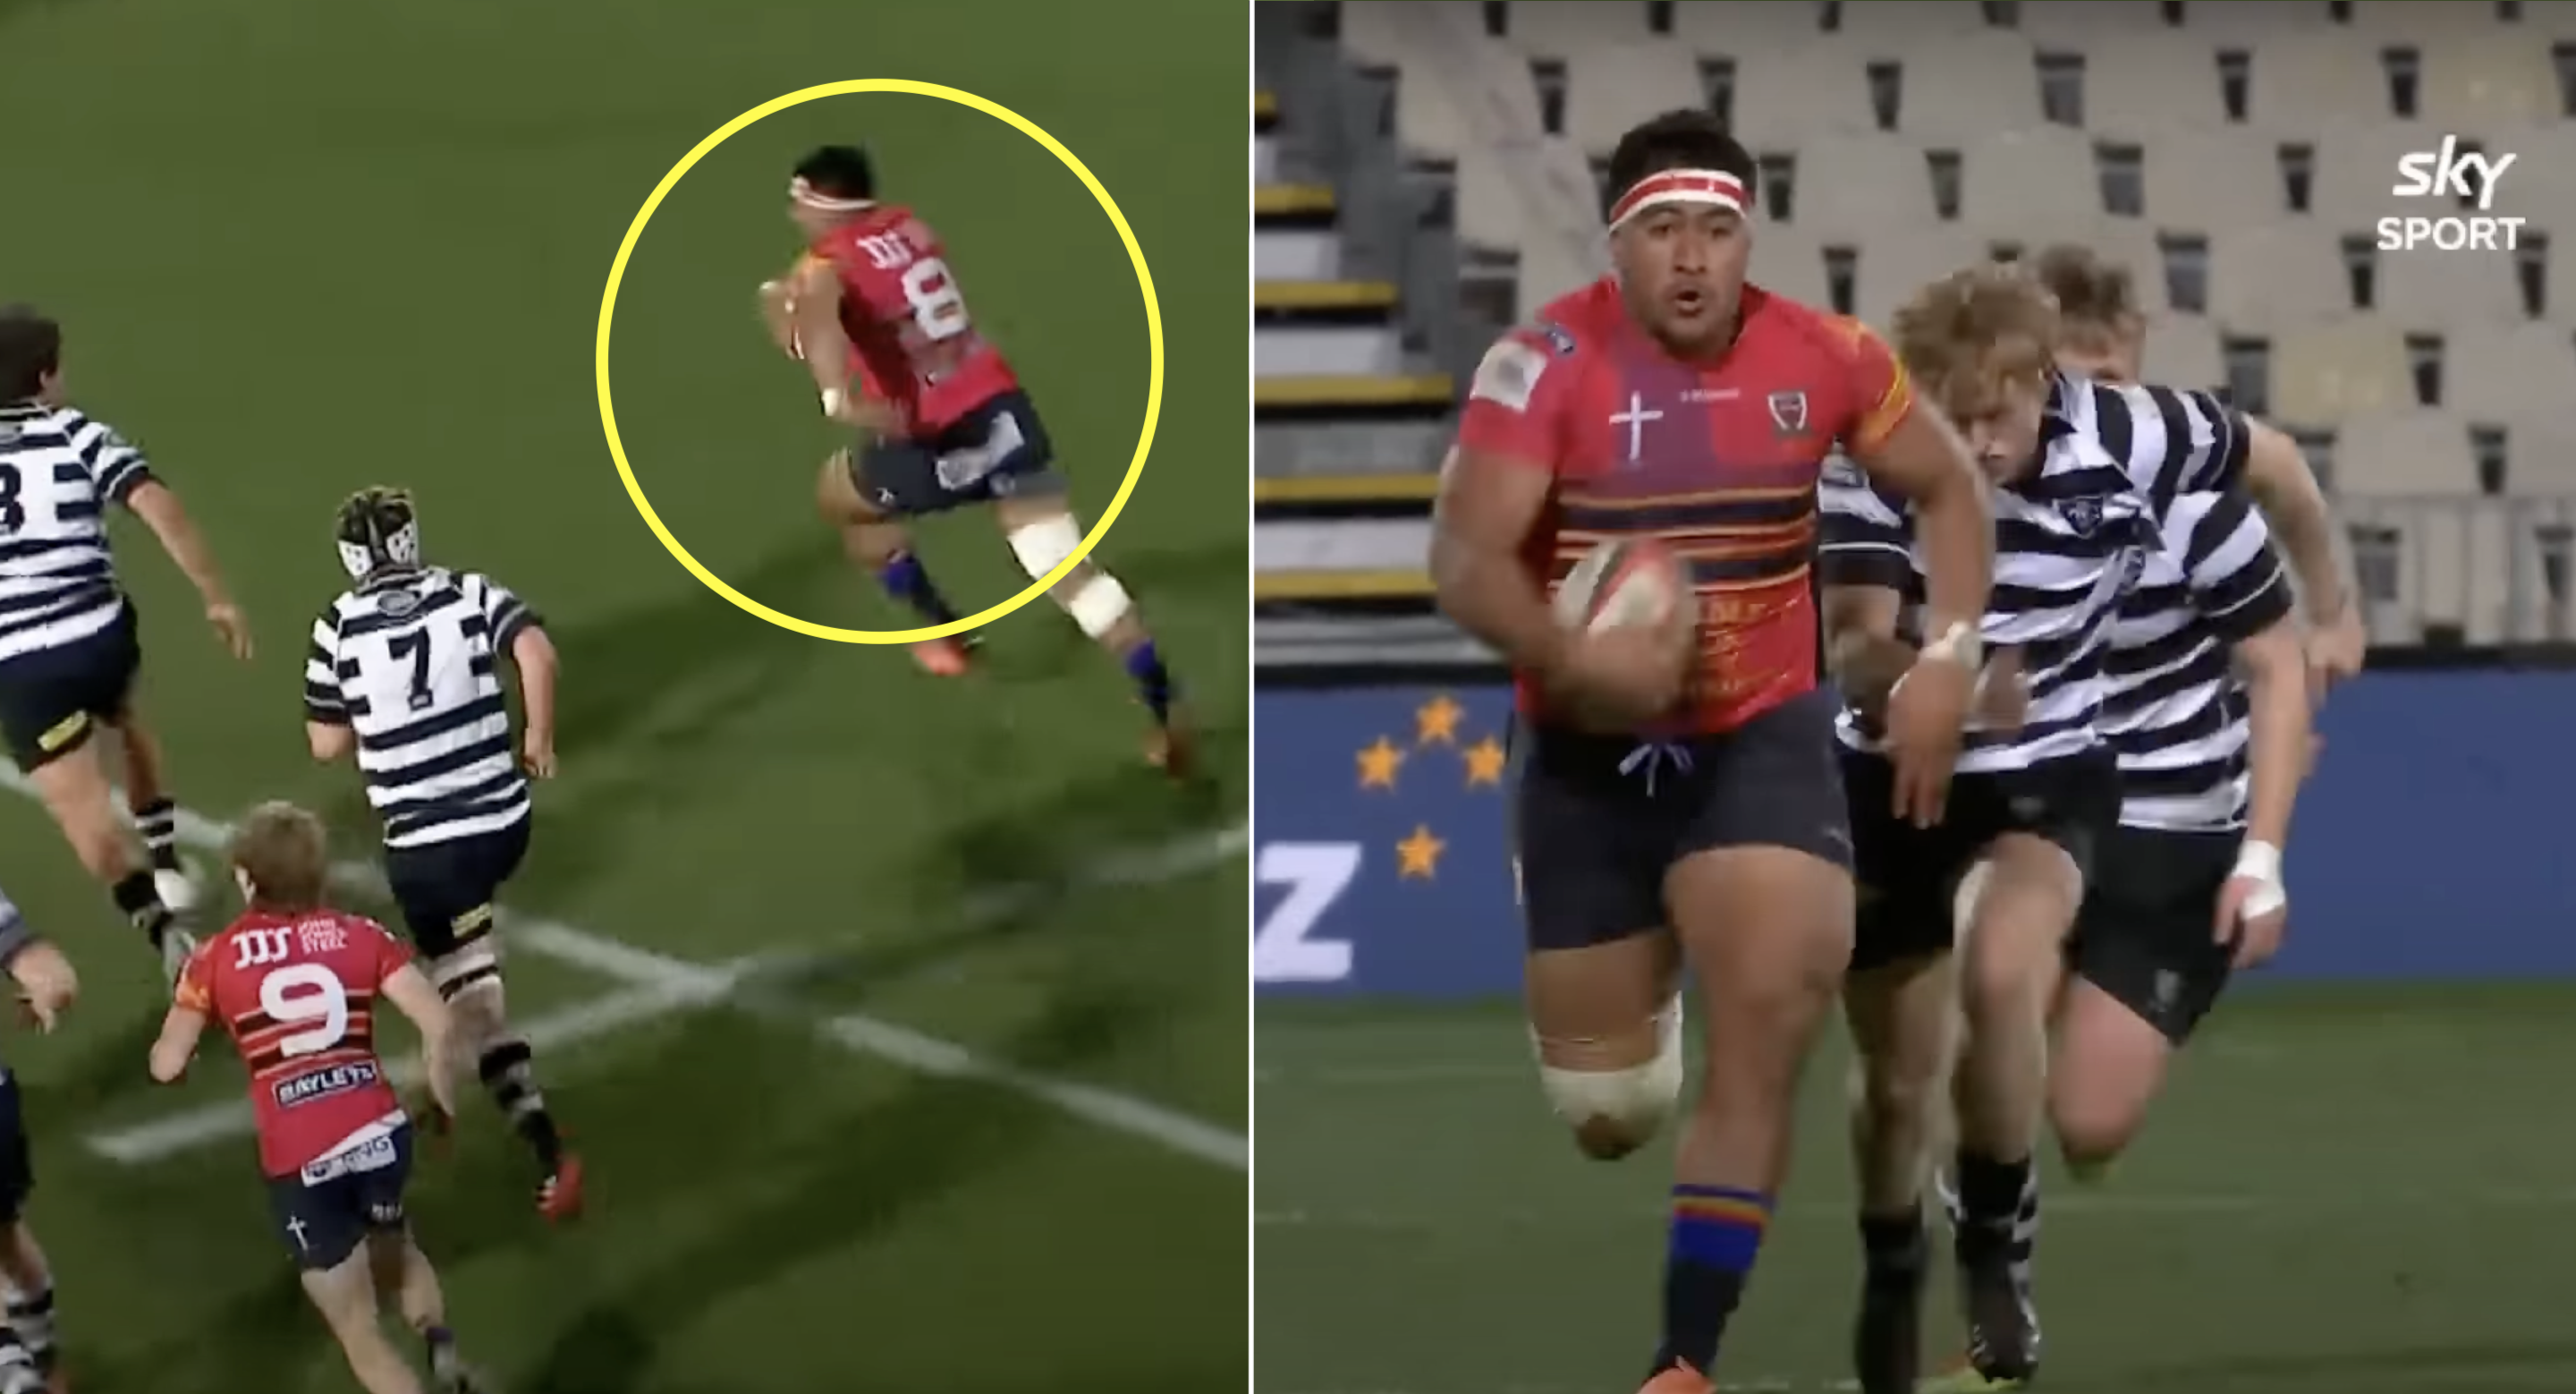 128kg New Zealand schoolboy looks unstoppable as he takes on entire team